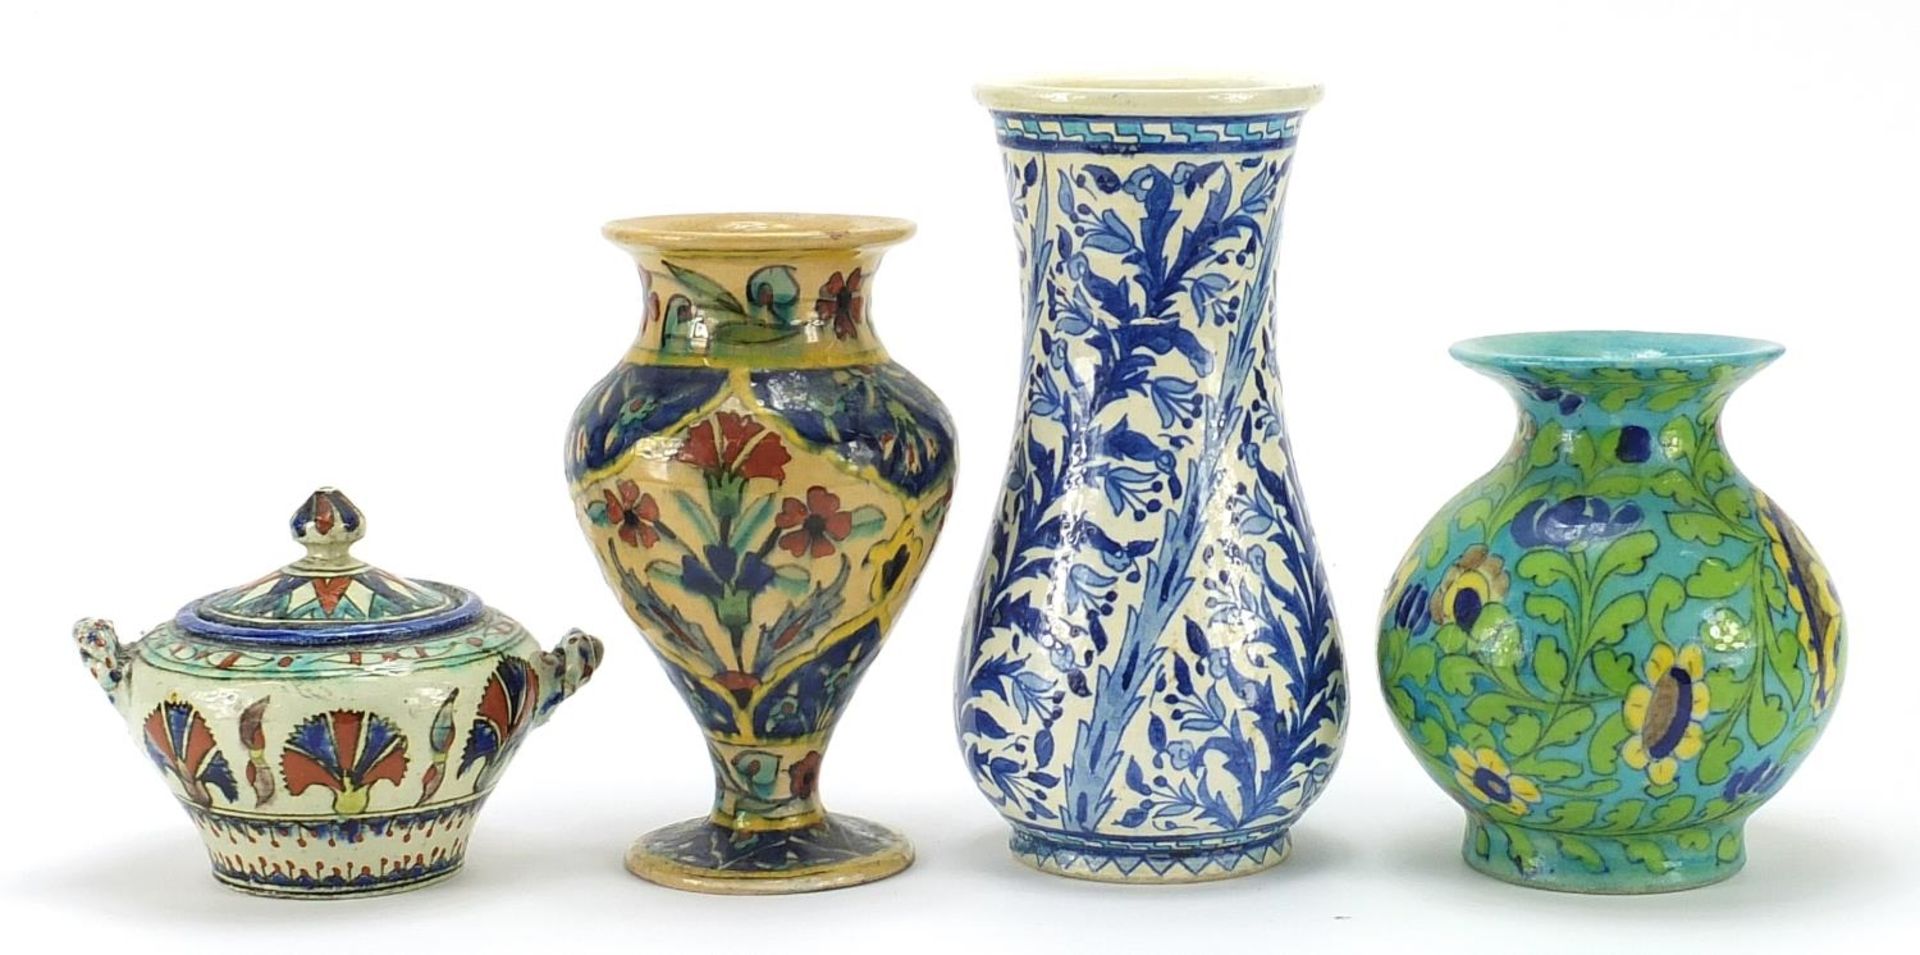 Palestinian pottery including three vases hand painted with flowers, the largest 20.5cm high - Image 2 of 3